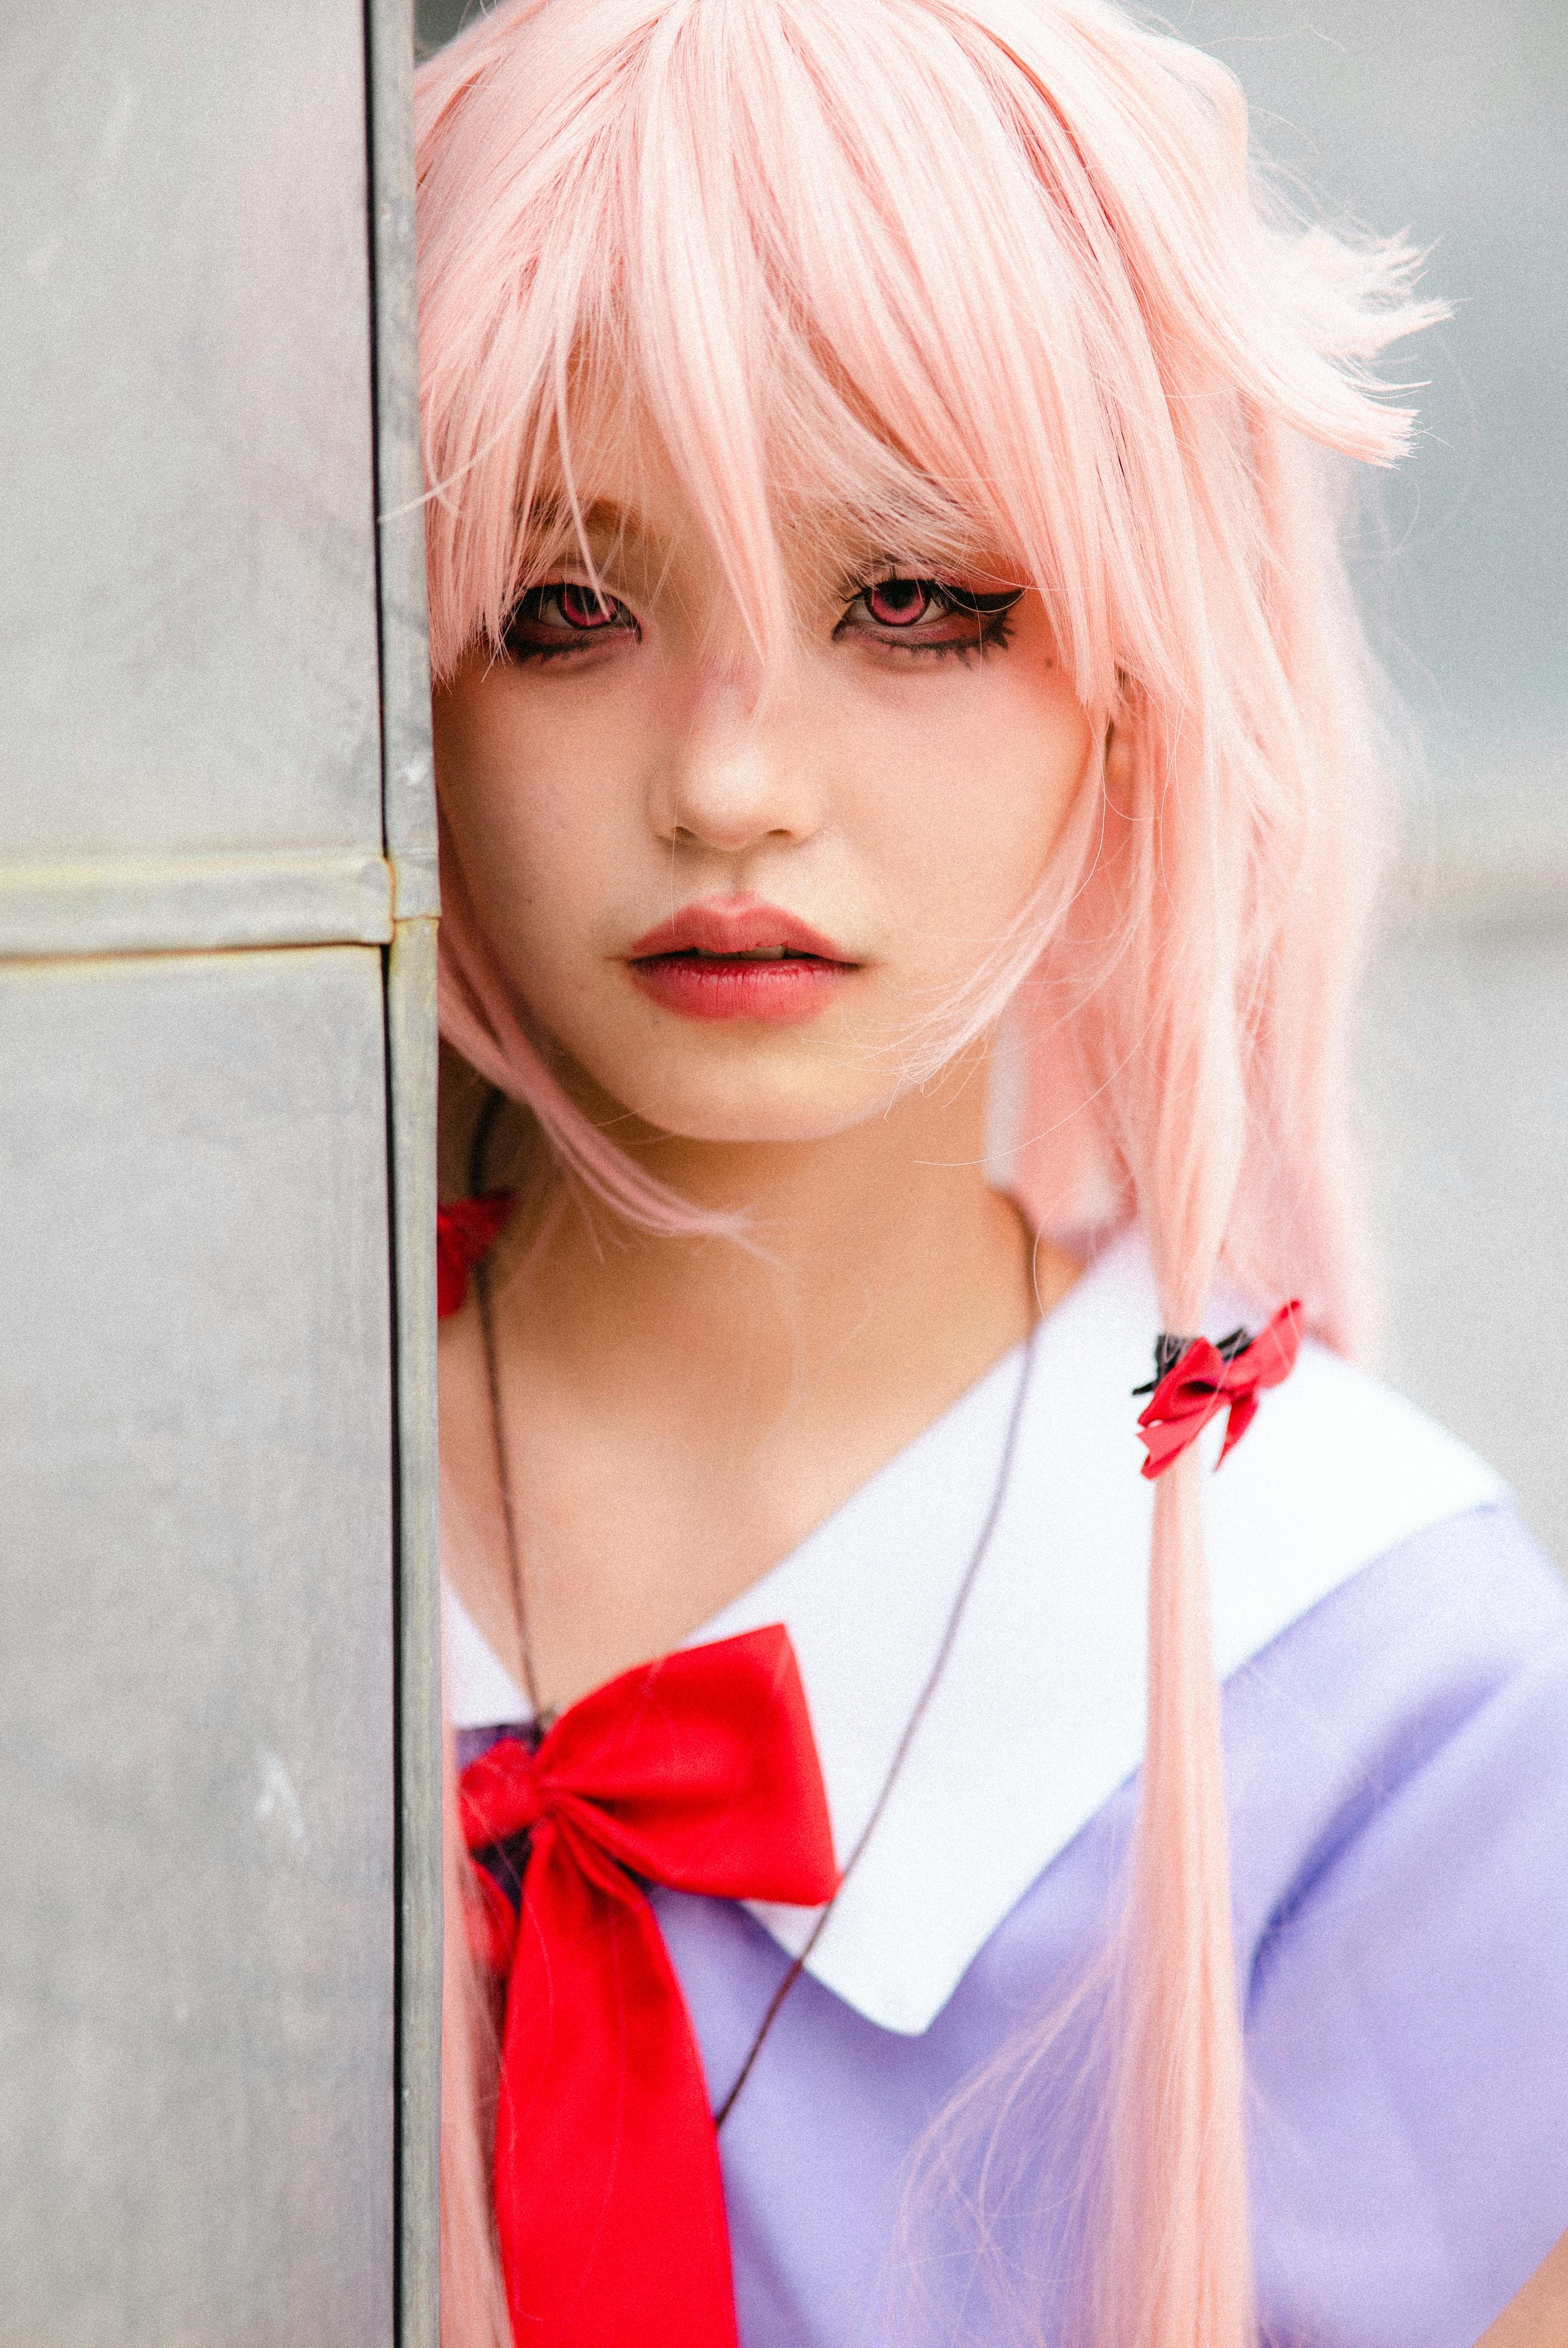 Hakken: Why This Malaysian Cosplayer Stood Out During Anime Fest